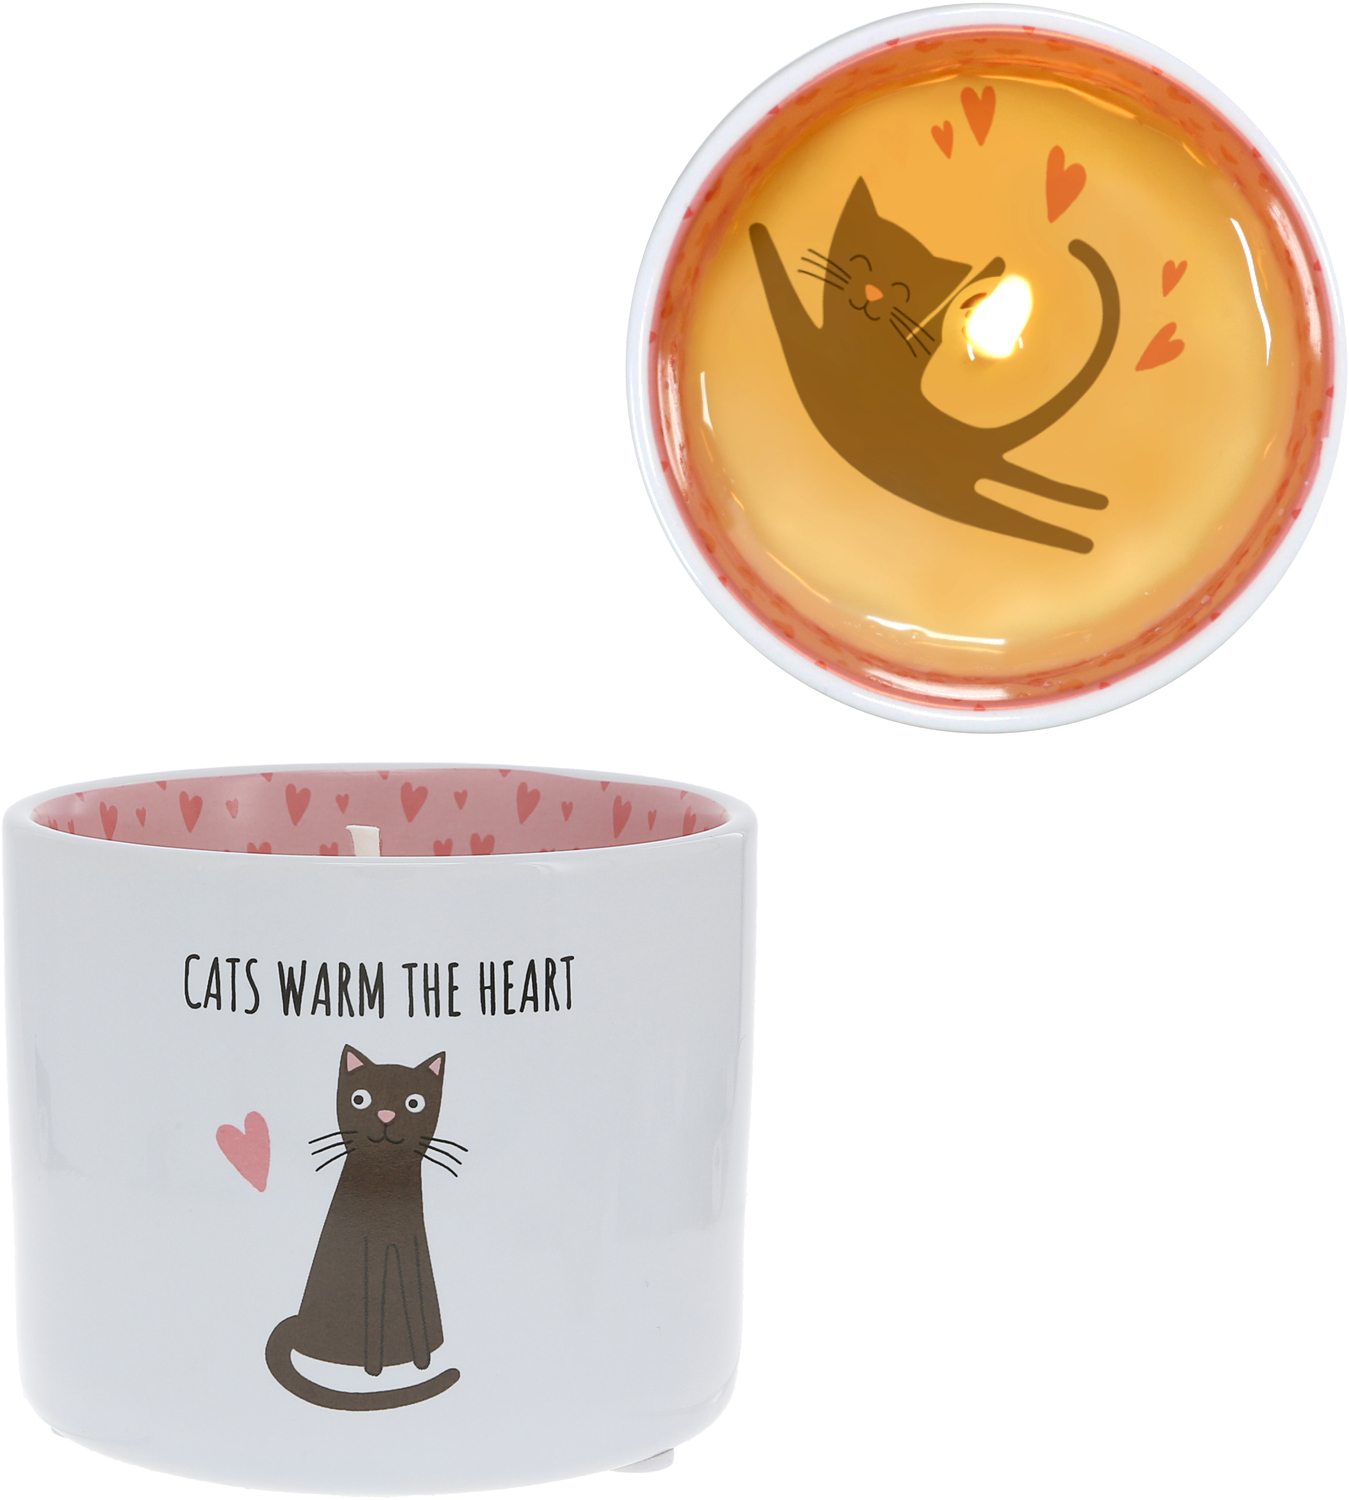 Warm The Heart by Pawsome Pals - Warm The Heart - 8 oz 100% Soy Wax Reveal, Single Wick Candle
Scent: Tranquility